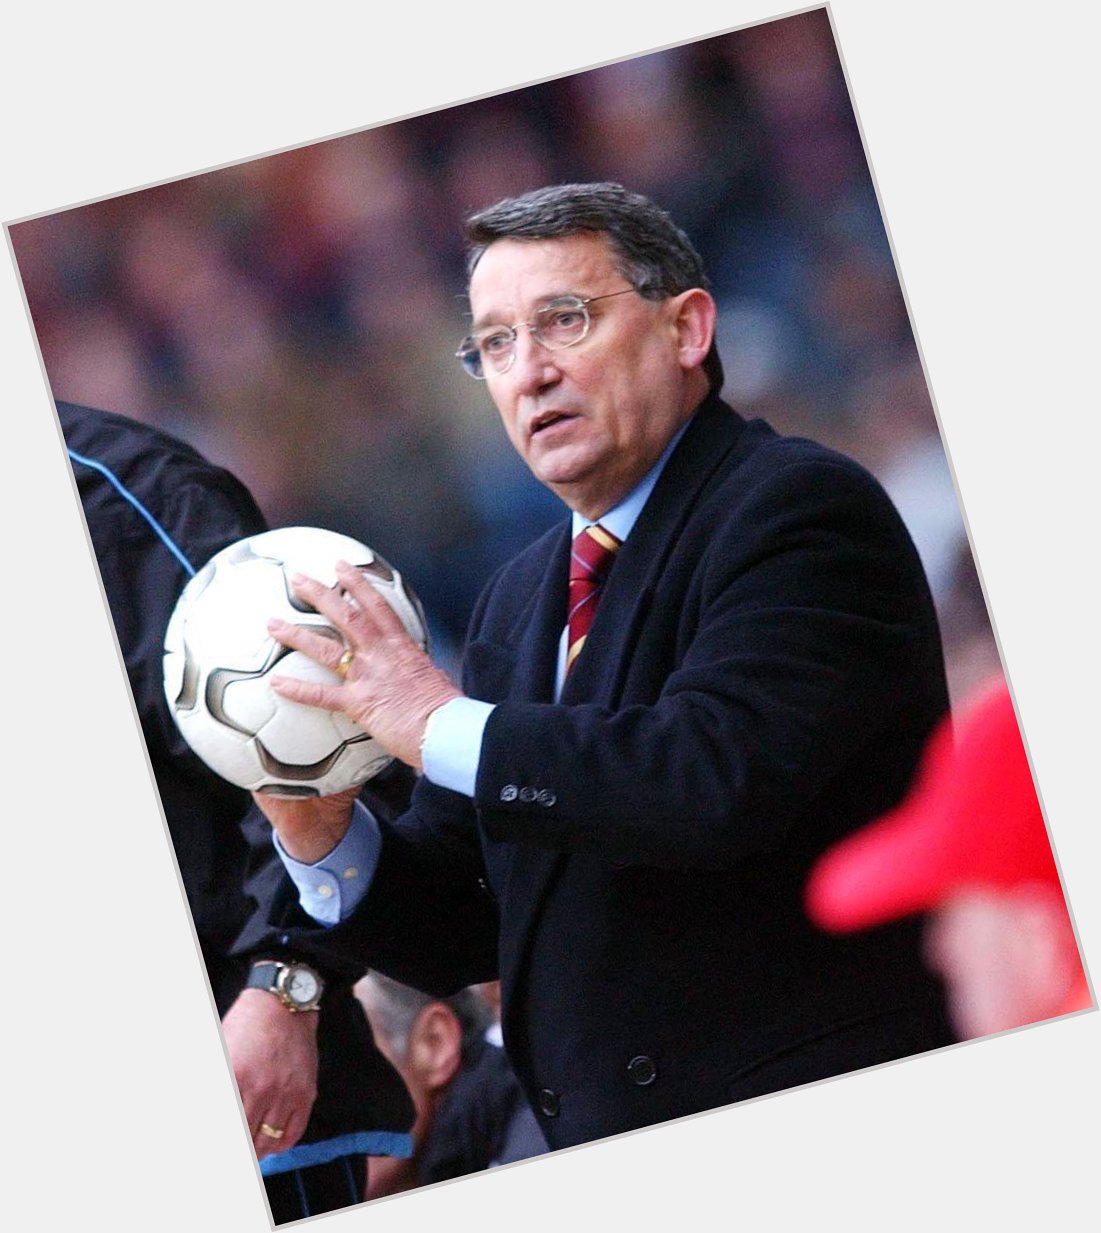 Graham Taylor would have turned 75 today

Happy Birthday to Mr. Football!  